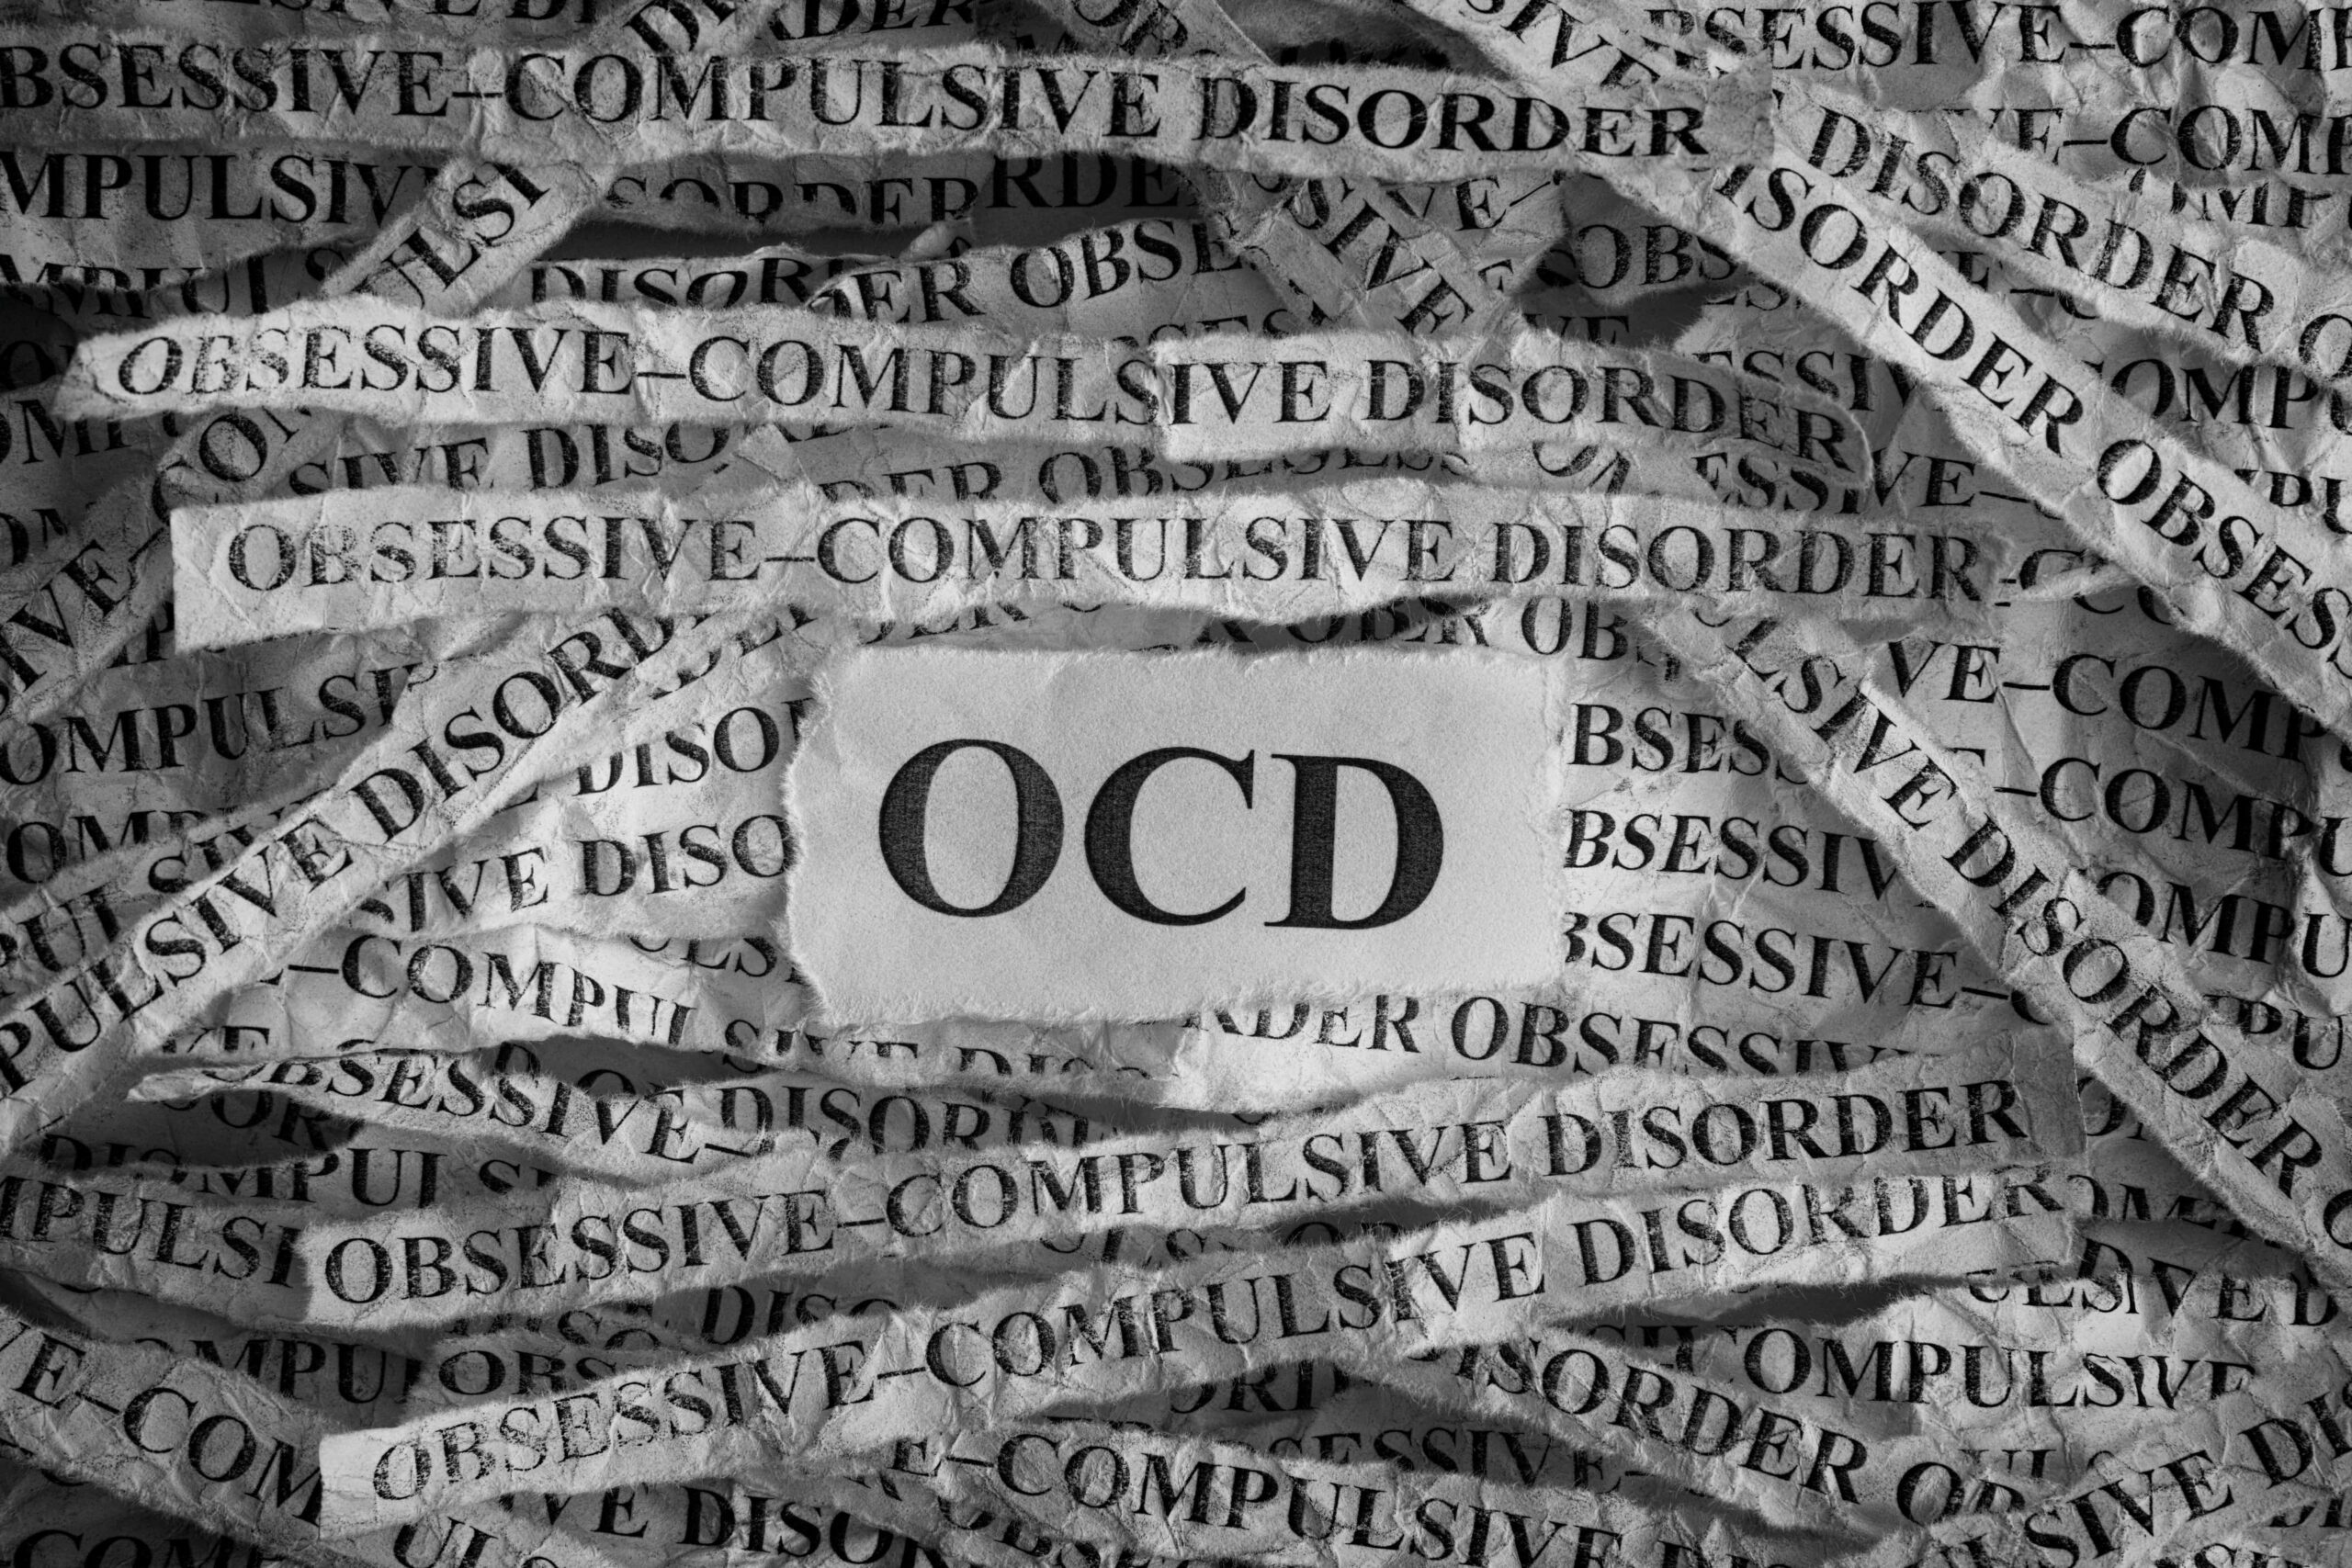 What Are The Different Types of OCD?